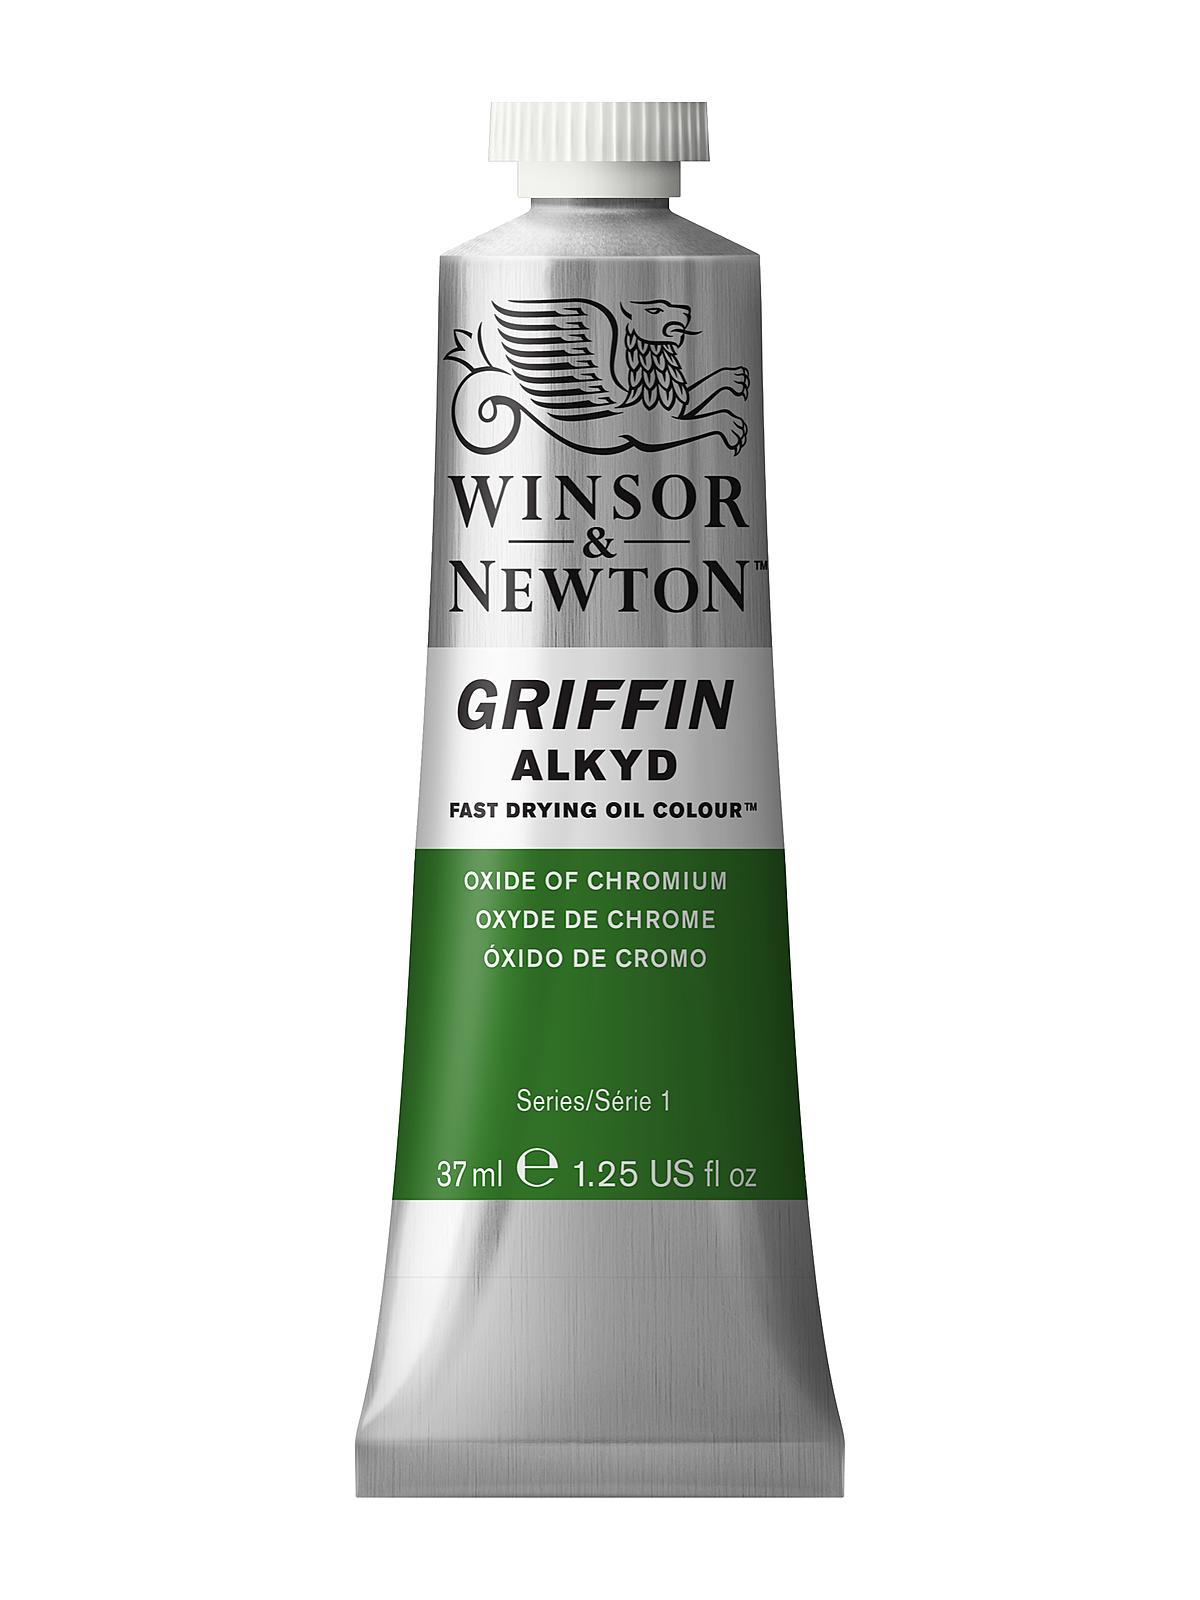 WINSOR & NEWTON Griffin Alkyd Oil Colours